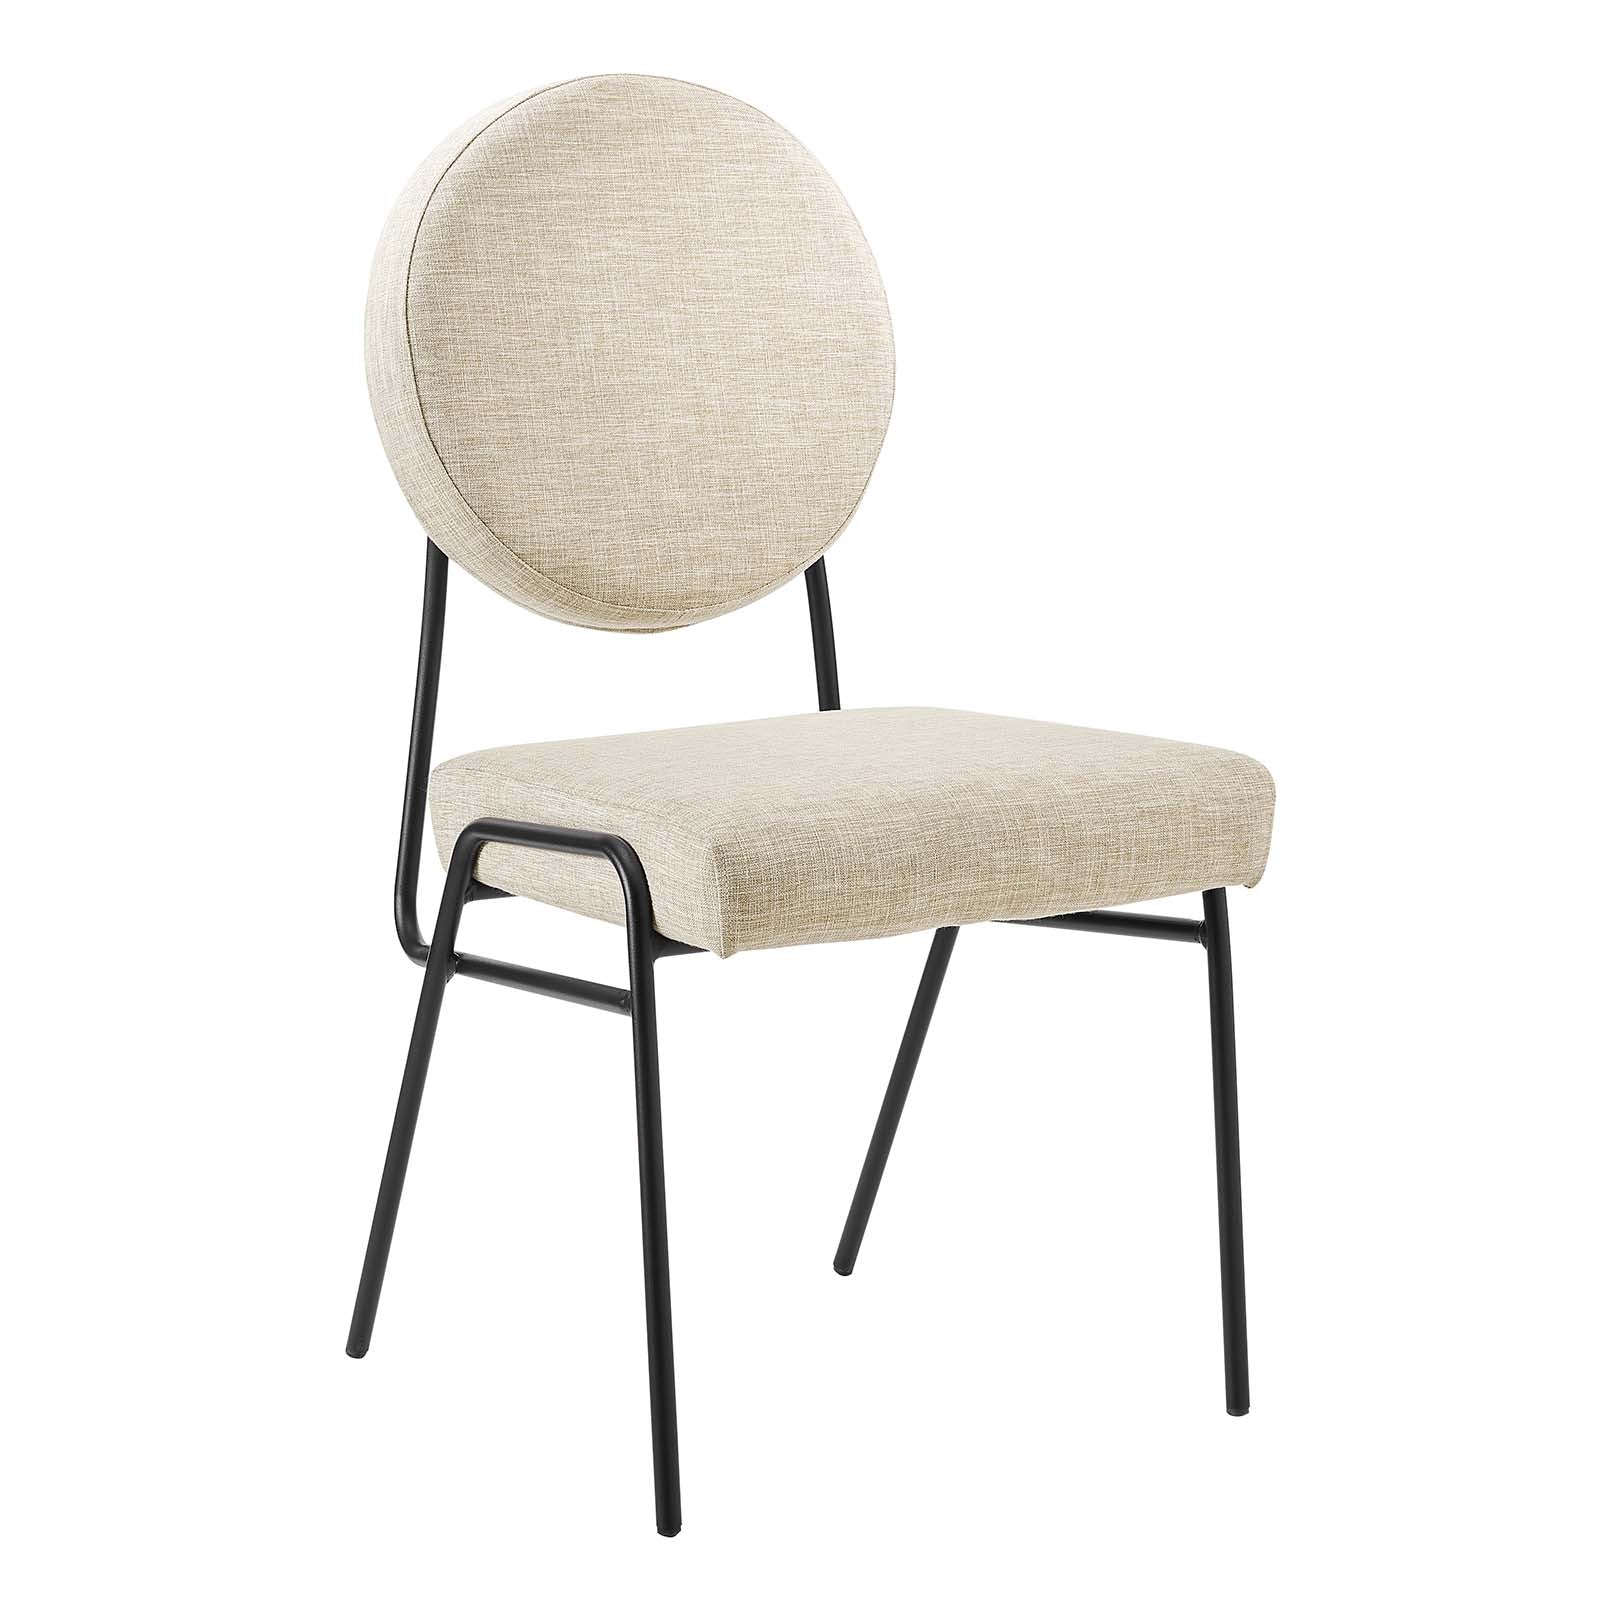 Craft Upholstered Fabric Dining Side Chair - East Shore Modern Home Furnishings